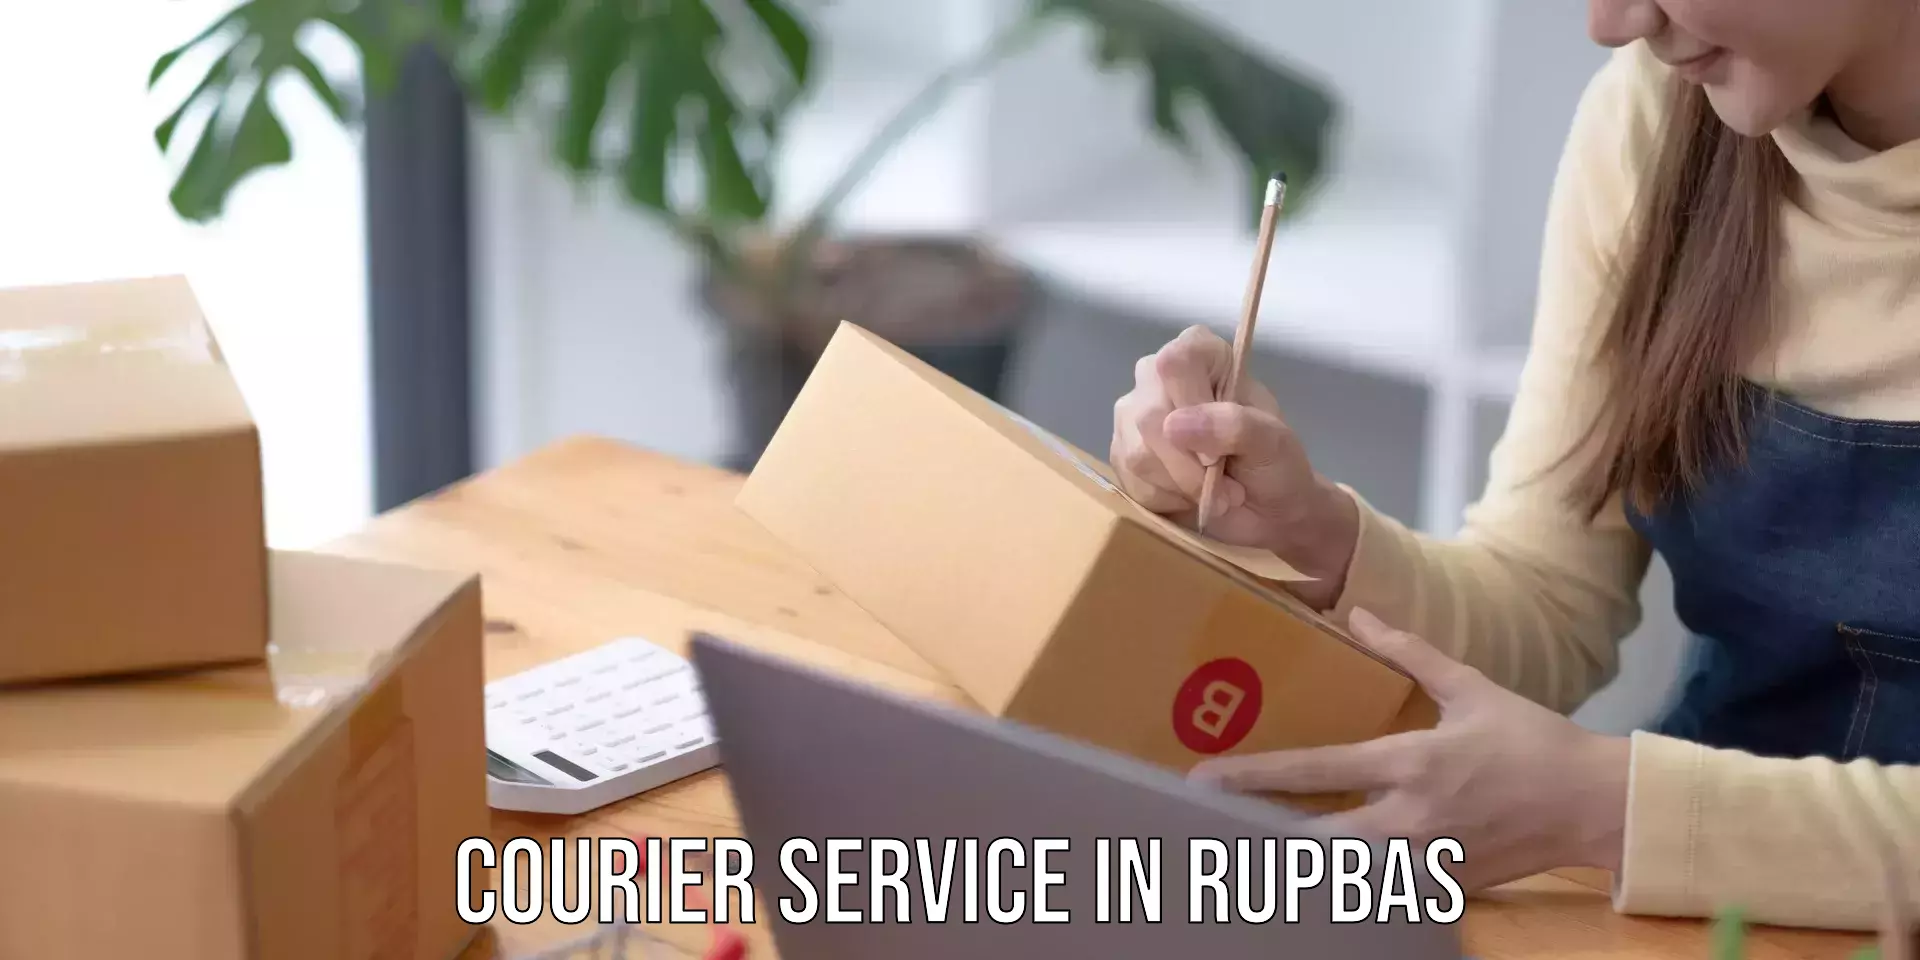 Quality courier partnerships in Rupbas